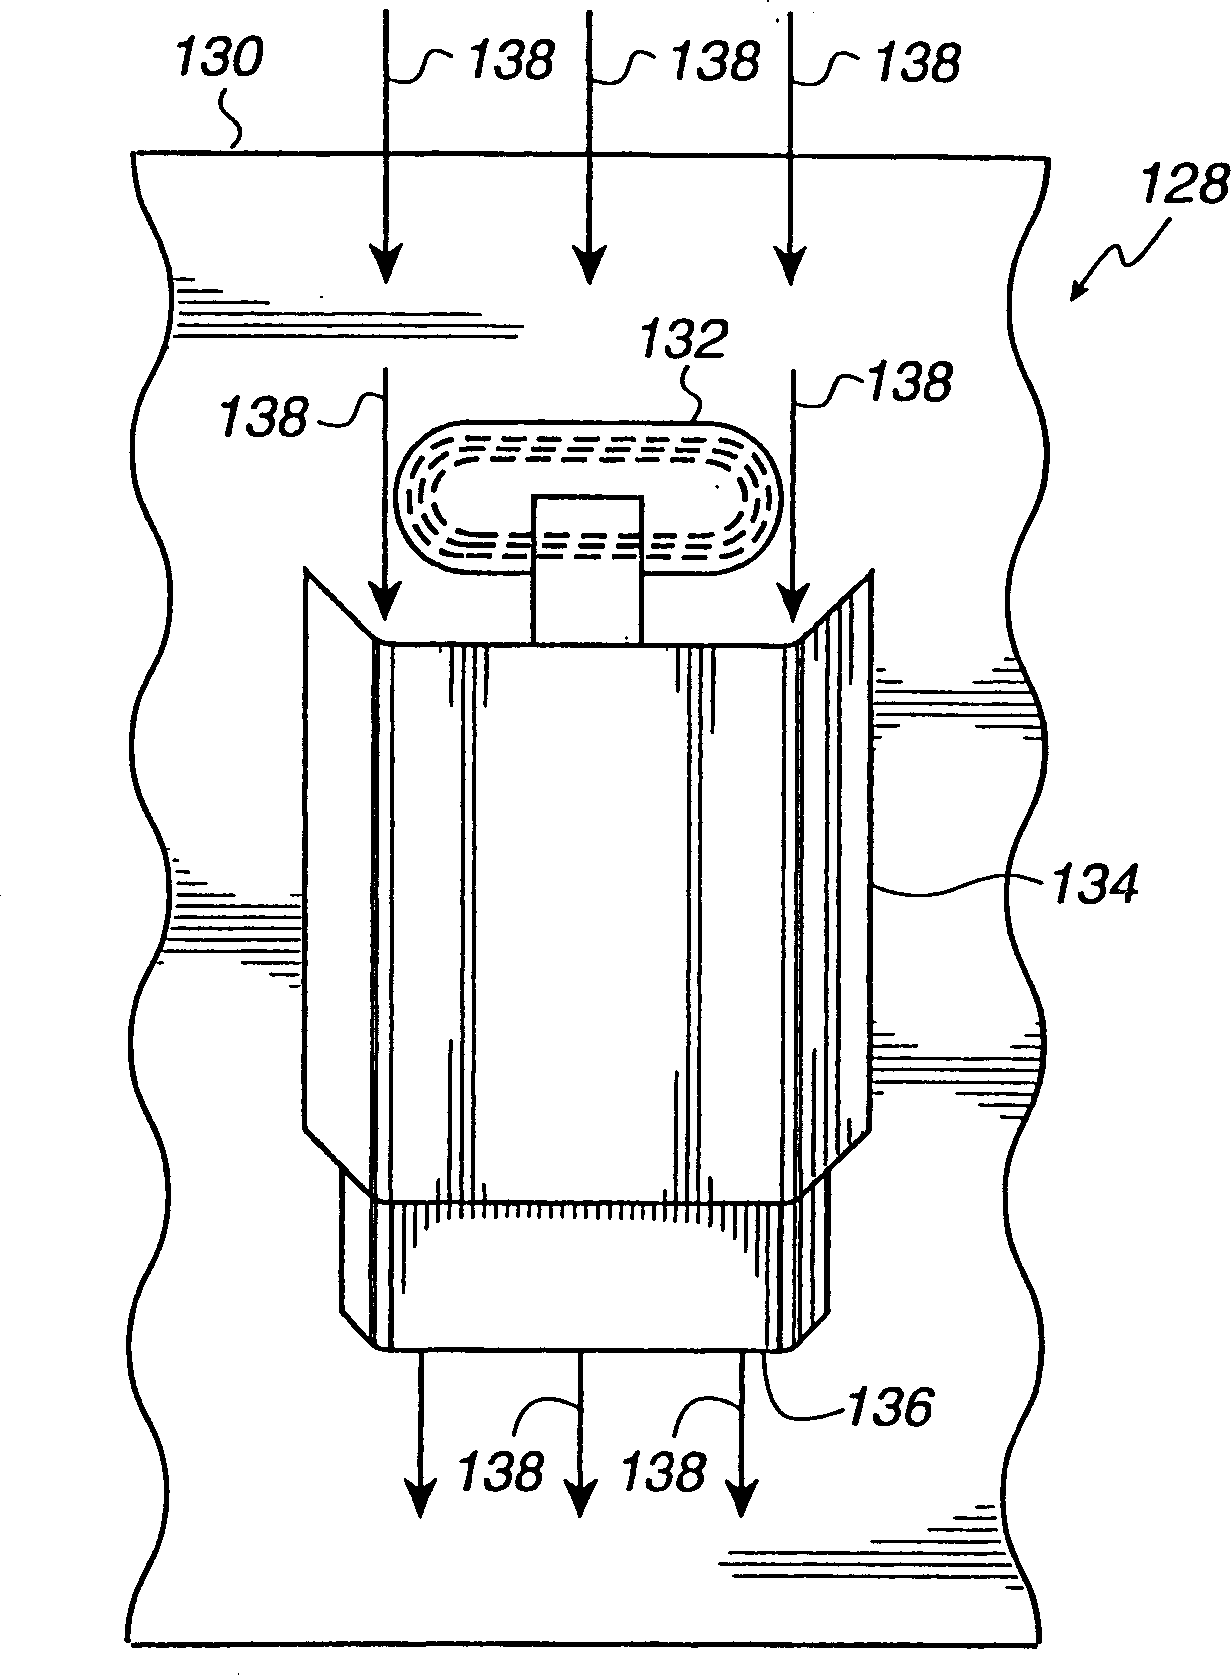 Appts. and method for creating ultra-clean mini-environment through localized air flow augentation